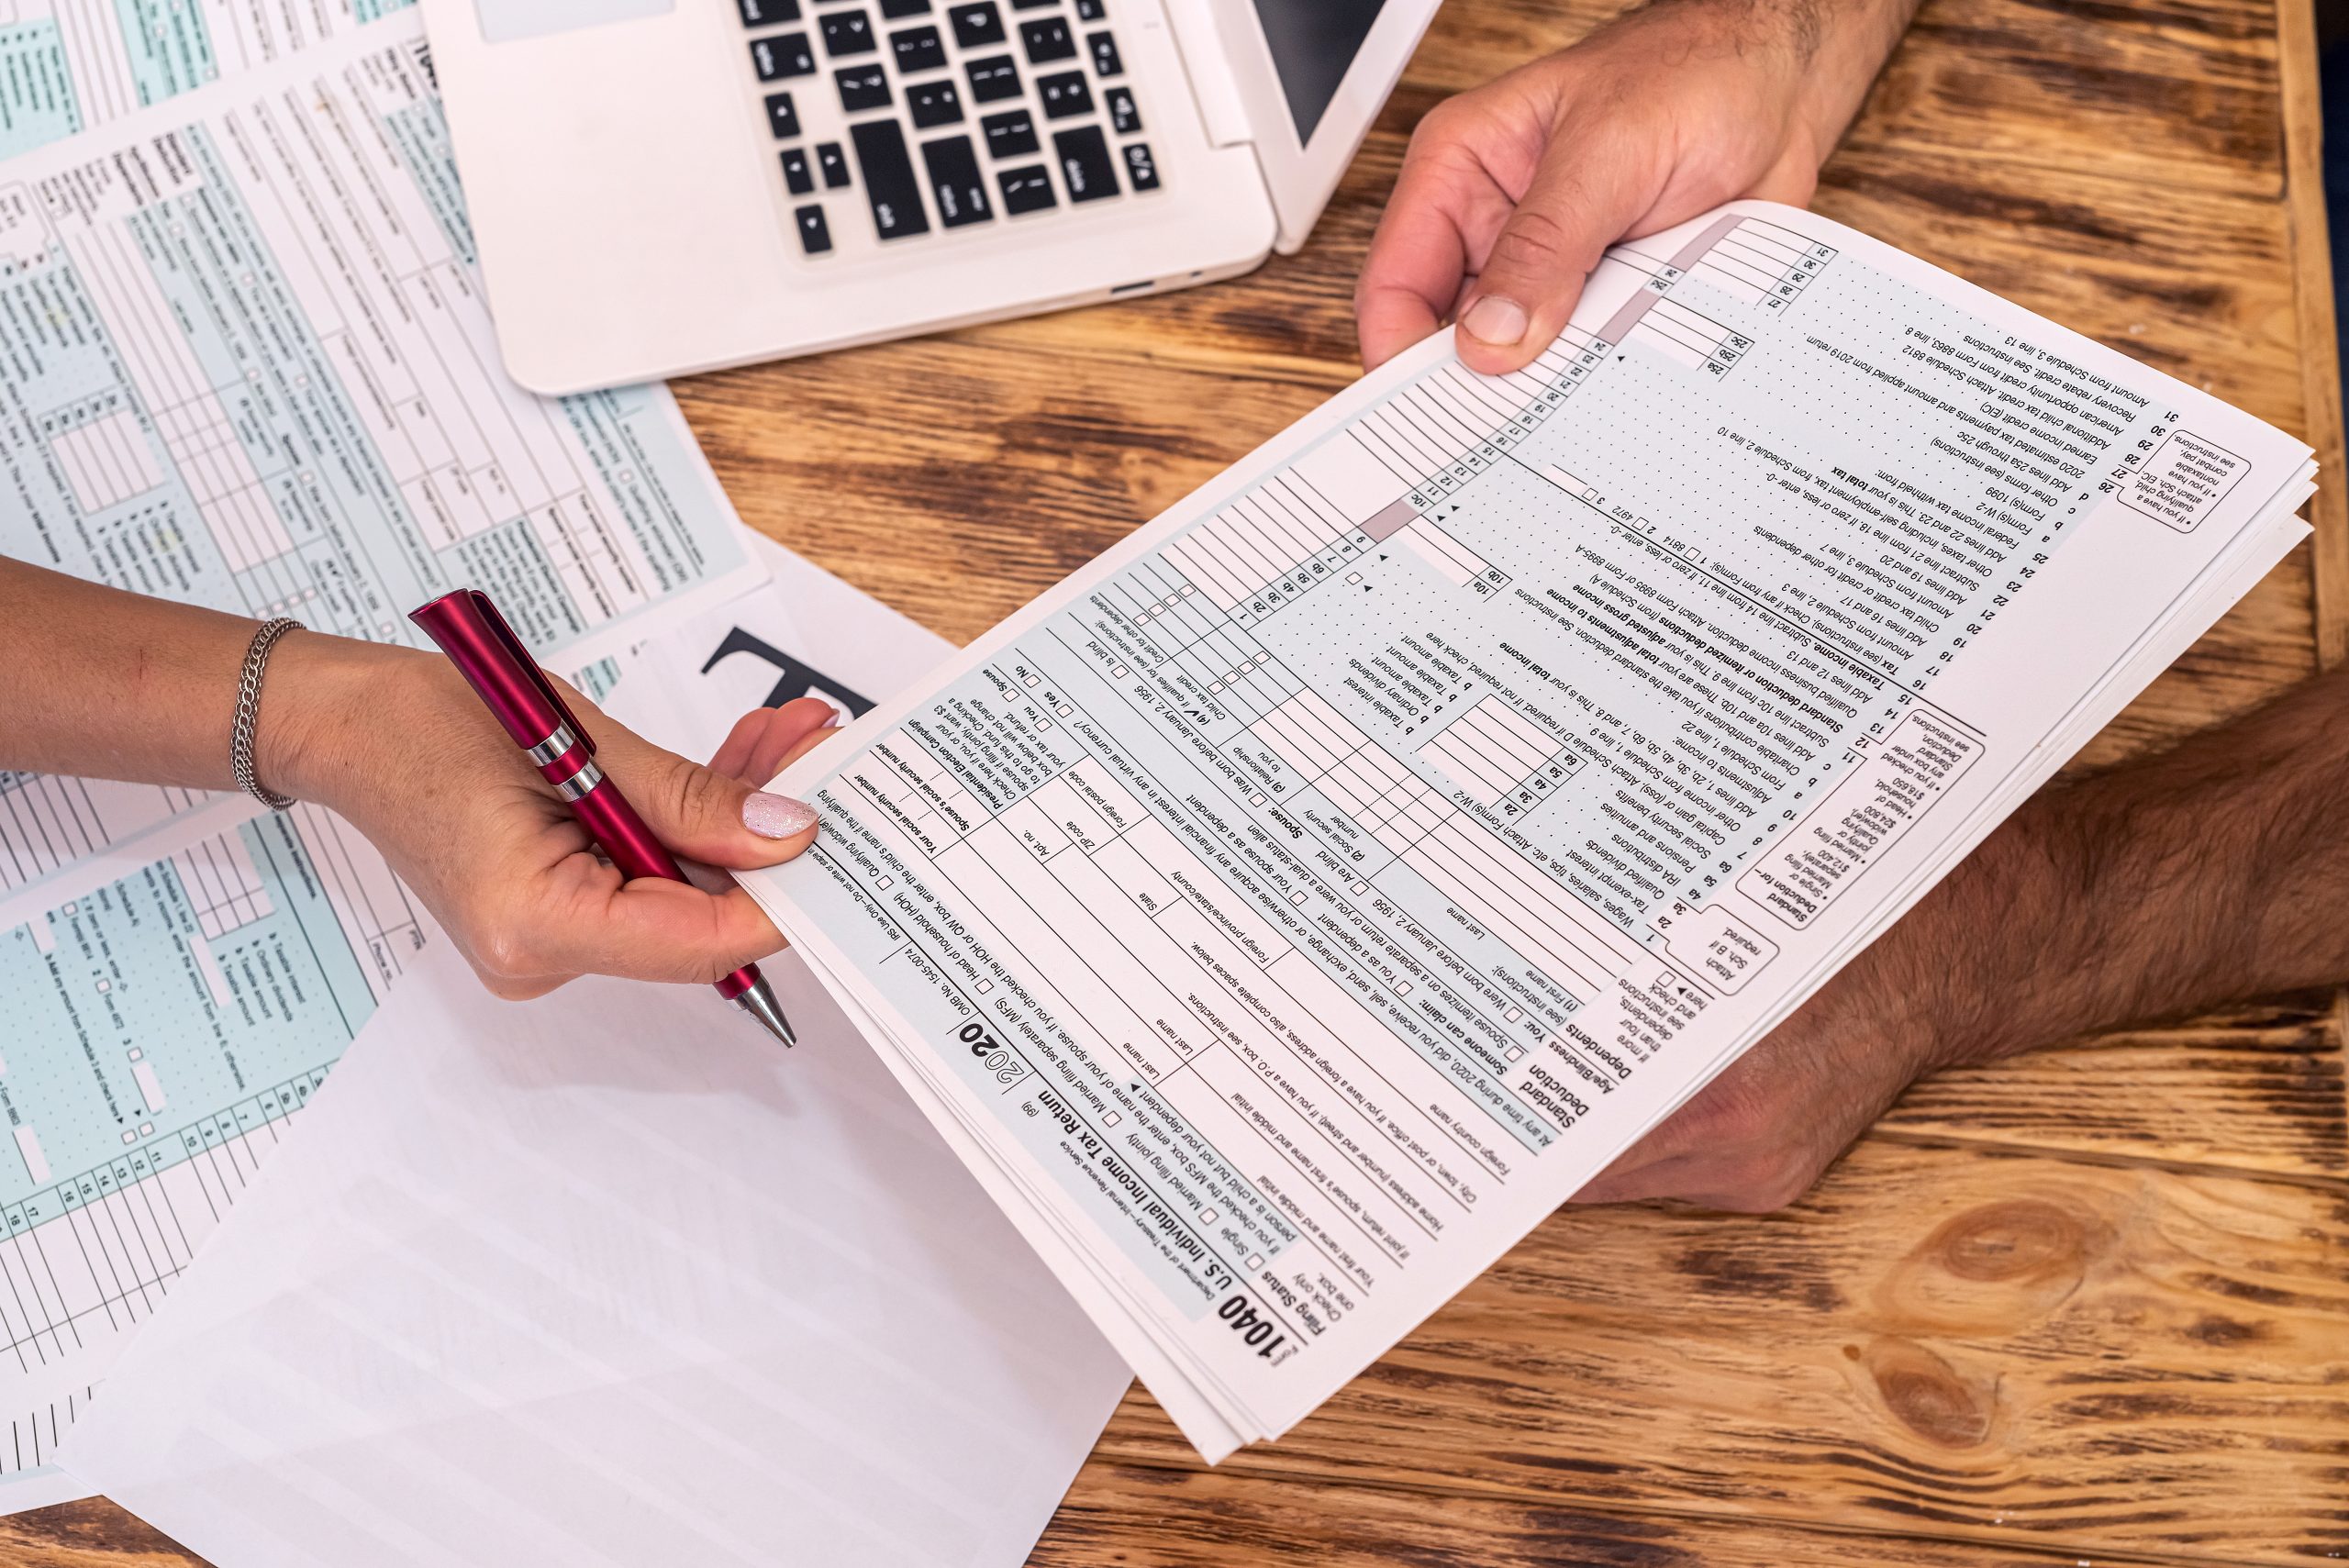 two employees at work fill out tax forms 1040 at the office desk. The concept of tax forms 1040